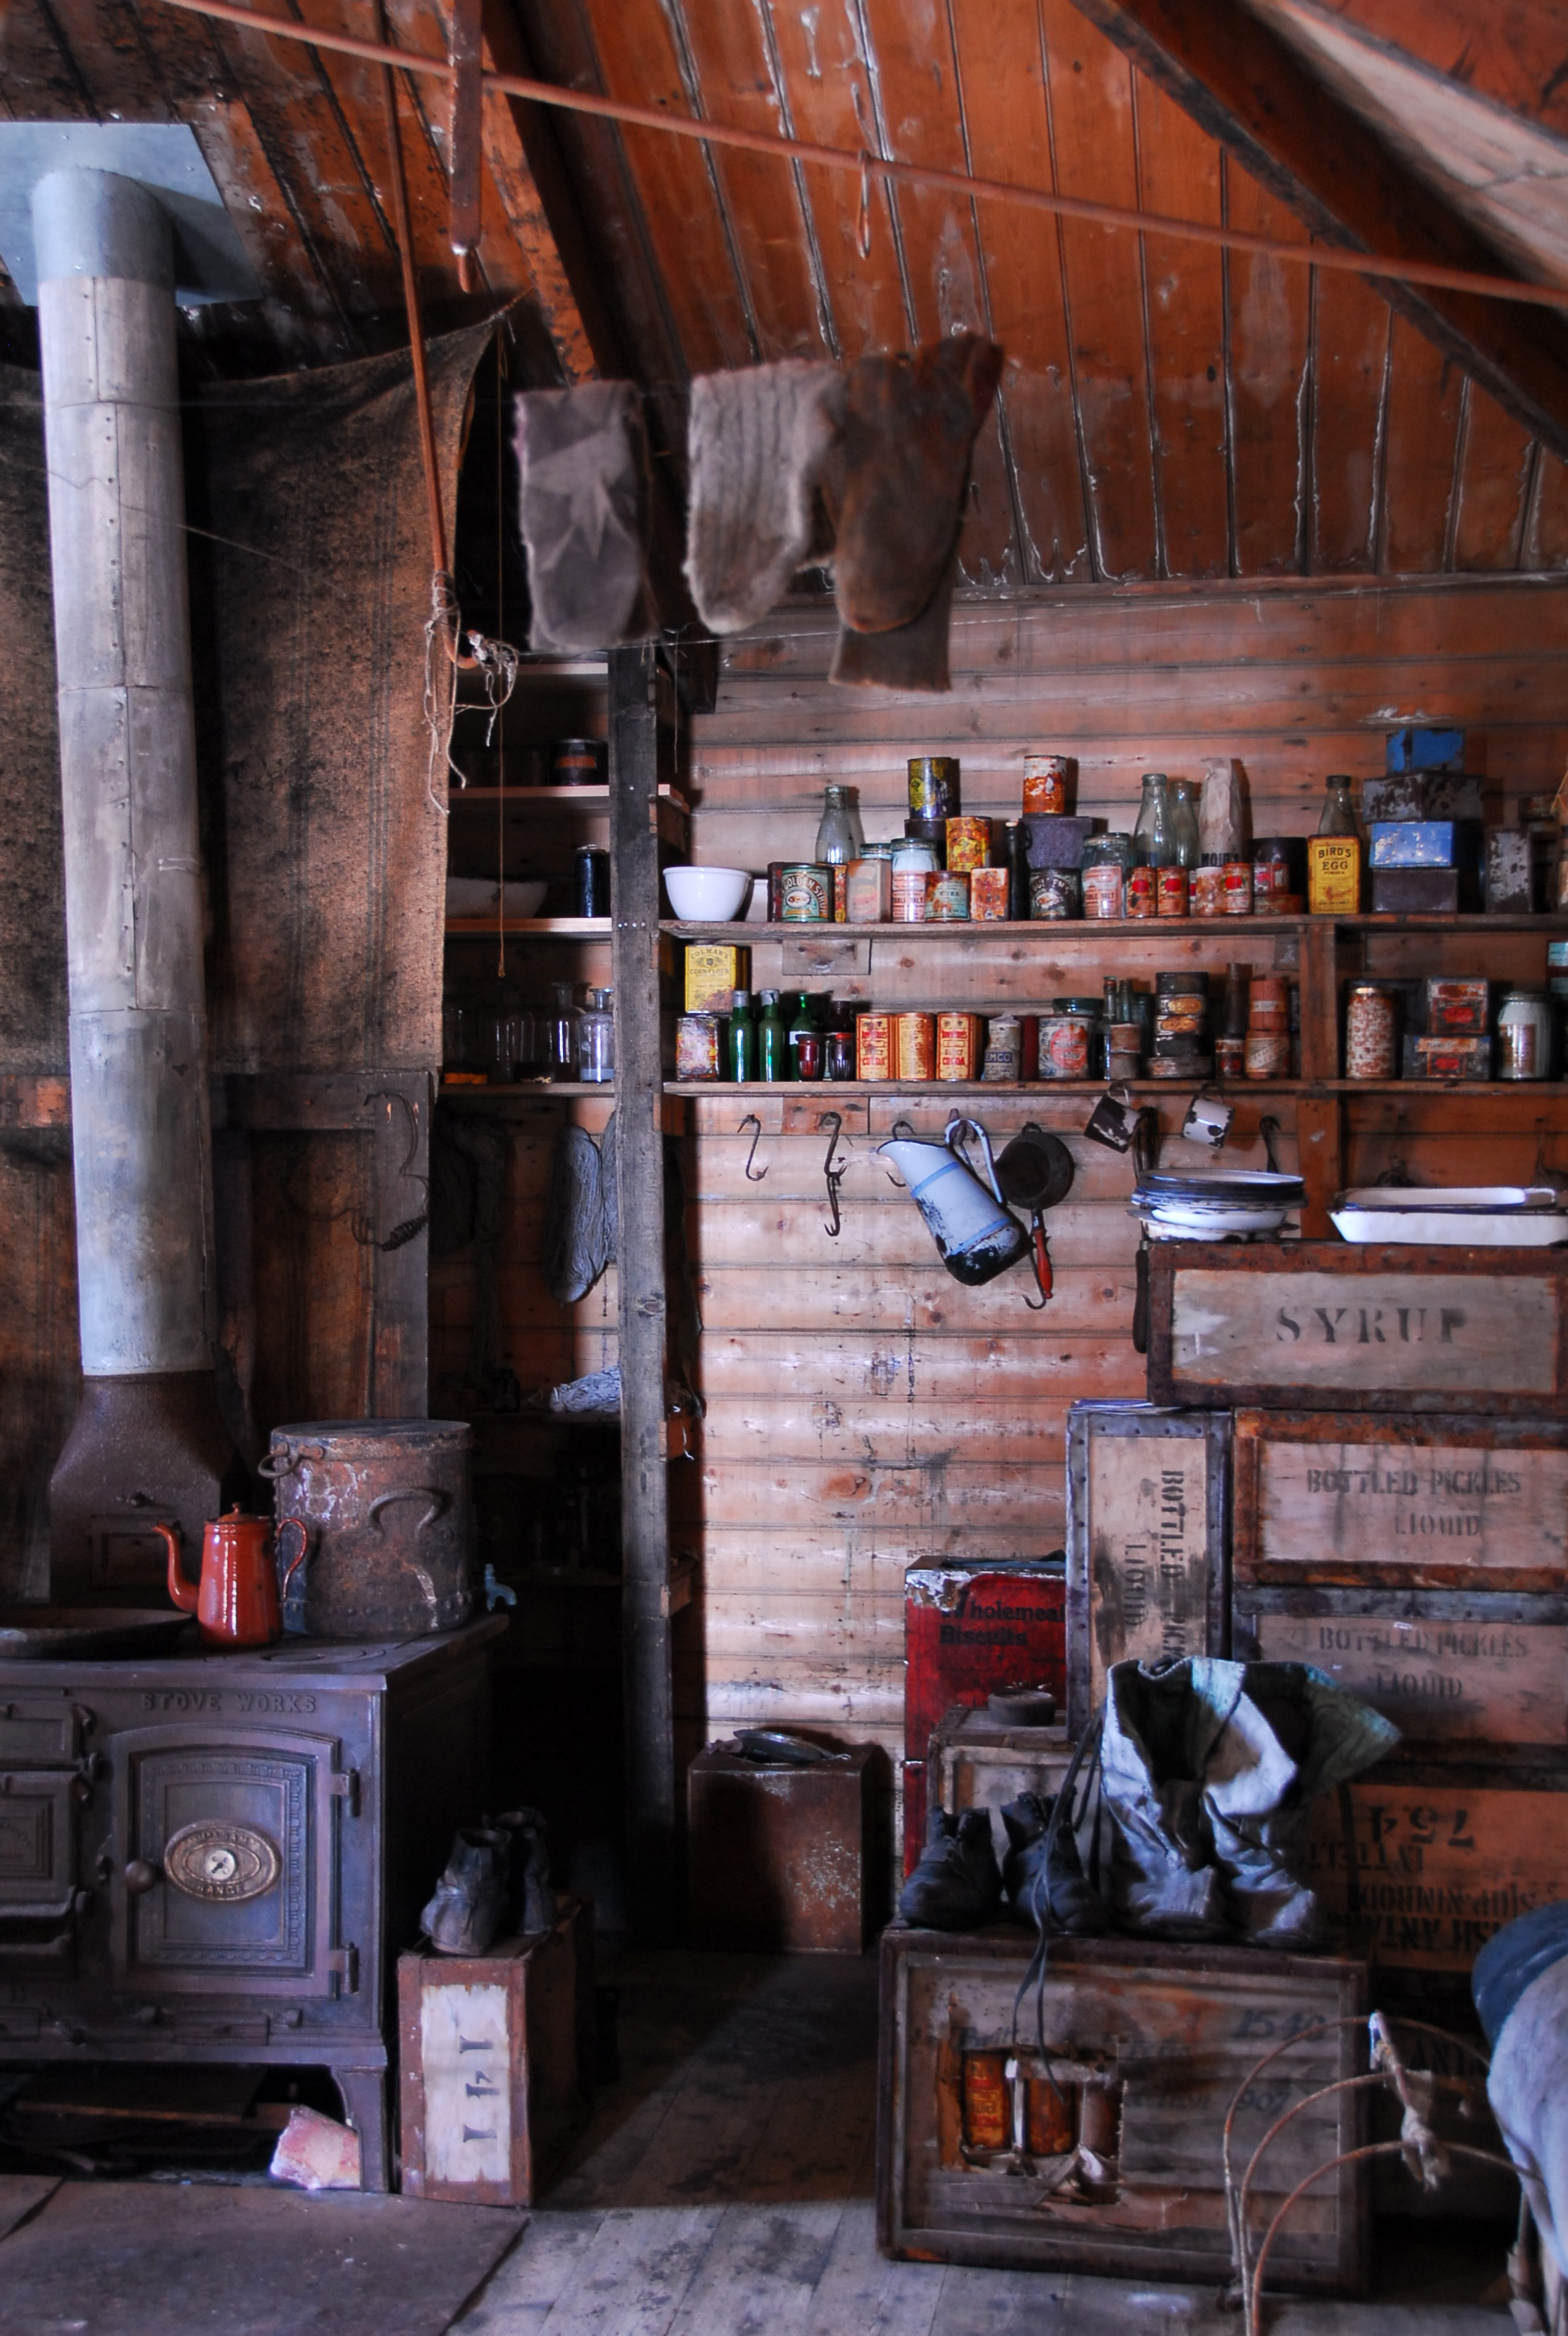 Inside an old small hut.